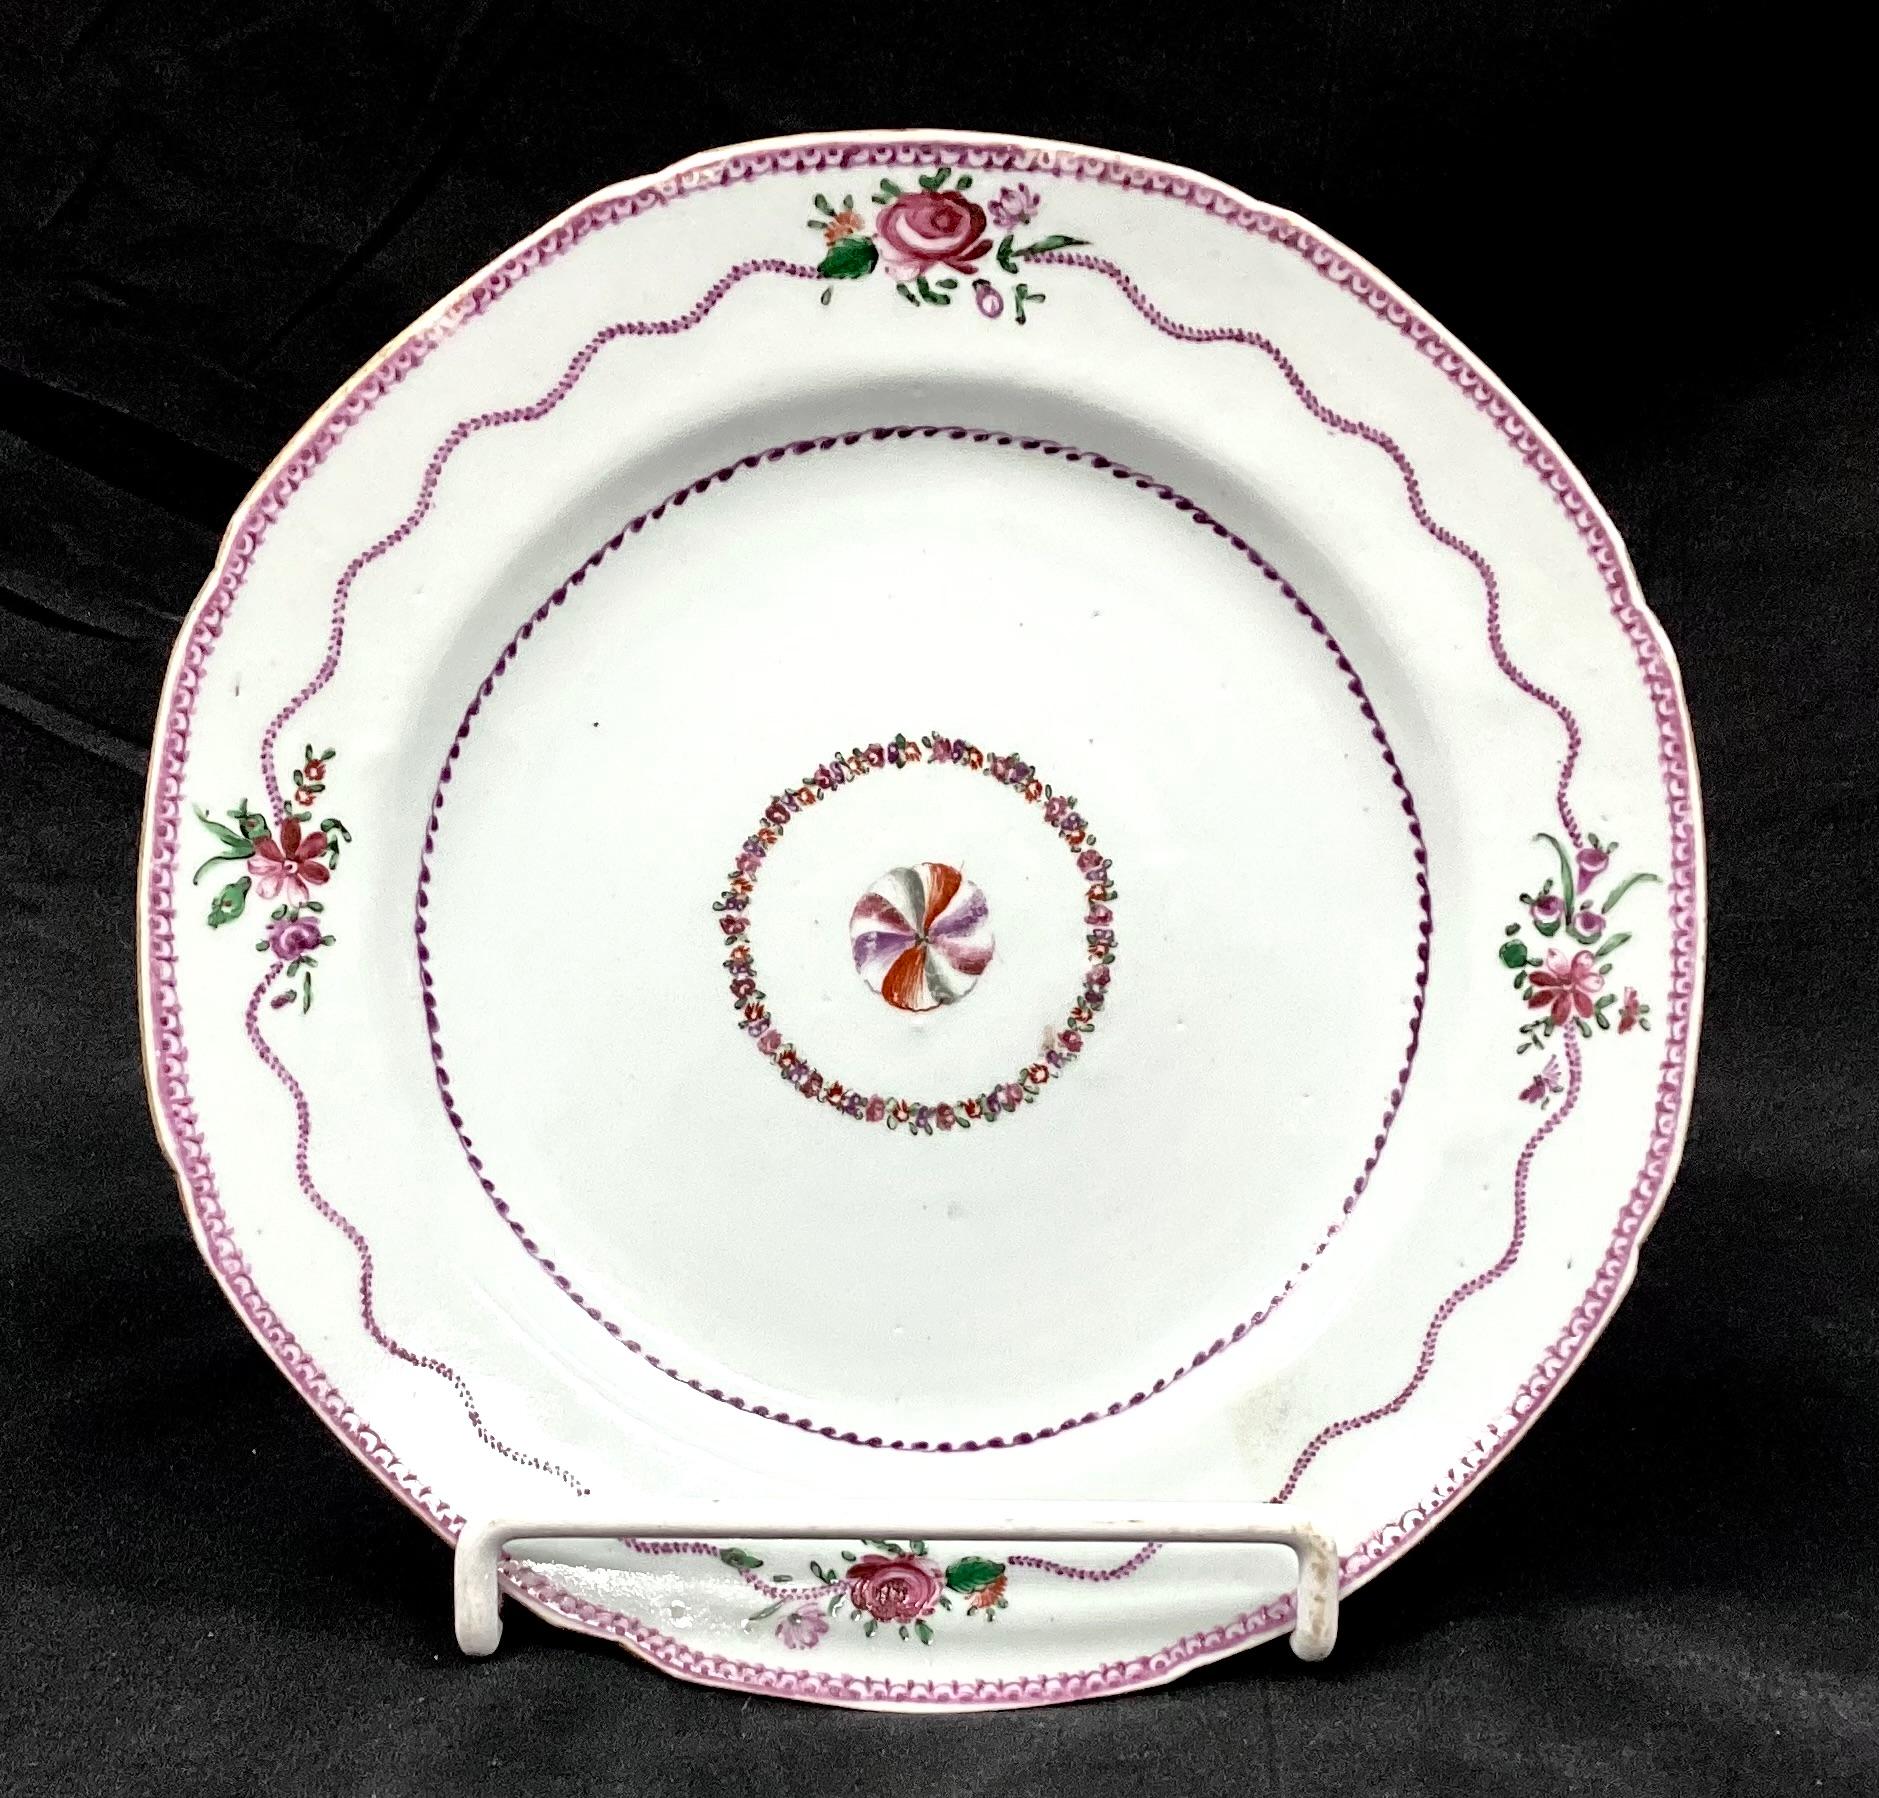 Set of six 18th century Chinese Export porcelain plates. Plates are hand-painted with florals with central flower surrounded by garland. Features purple, green and white colors. 